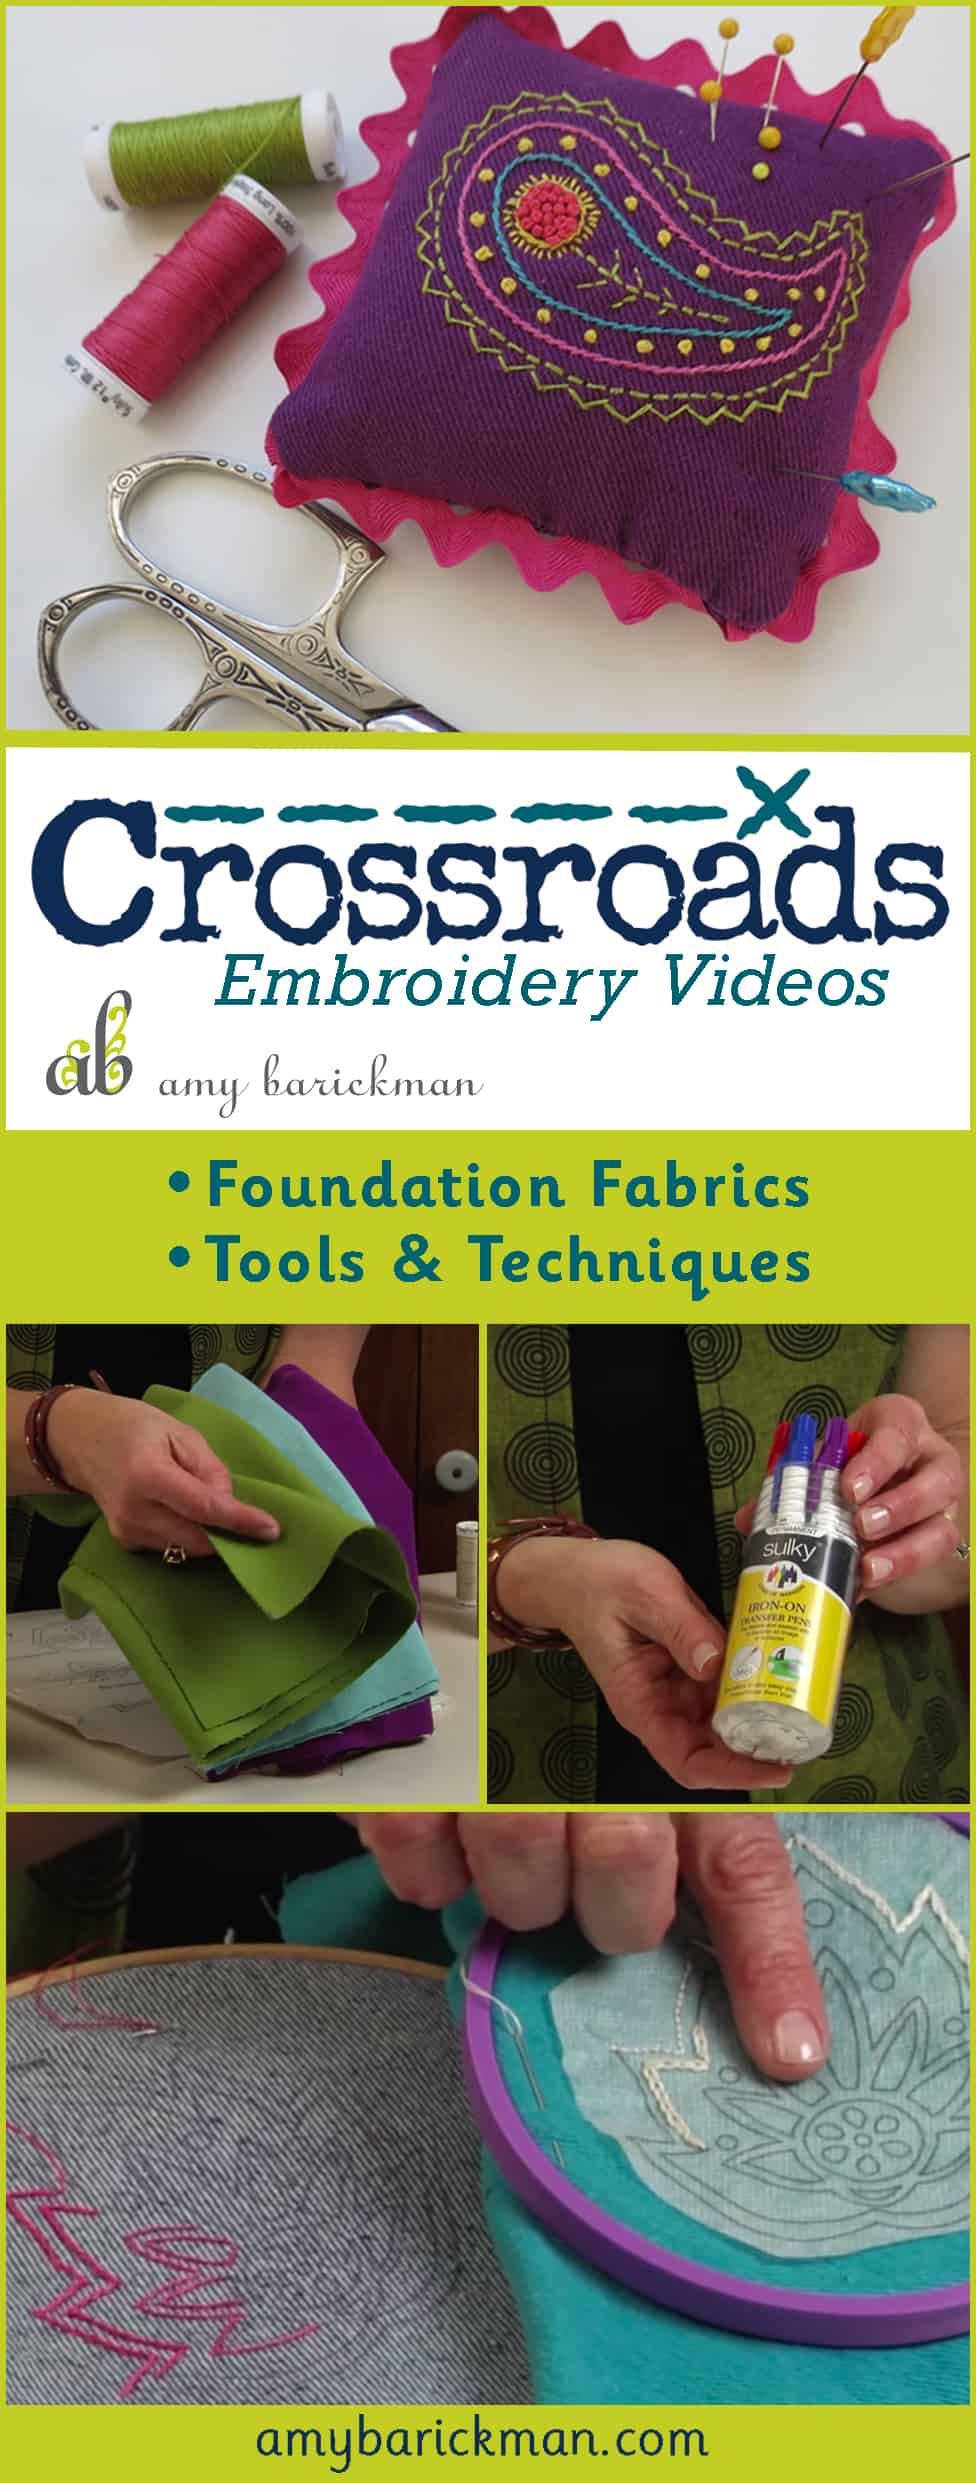 Indygo Junction Founder Amy Barickman gives an in depth tutorial for hand embroidery!